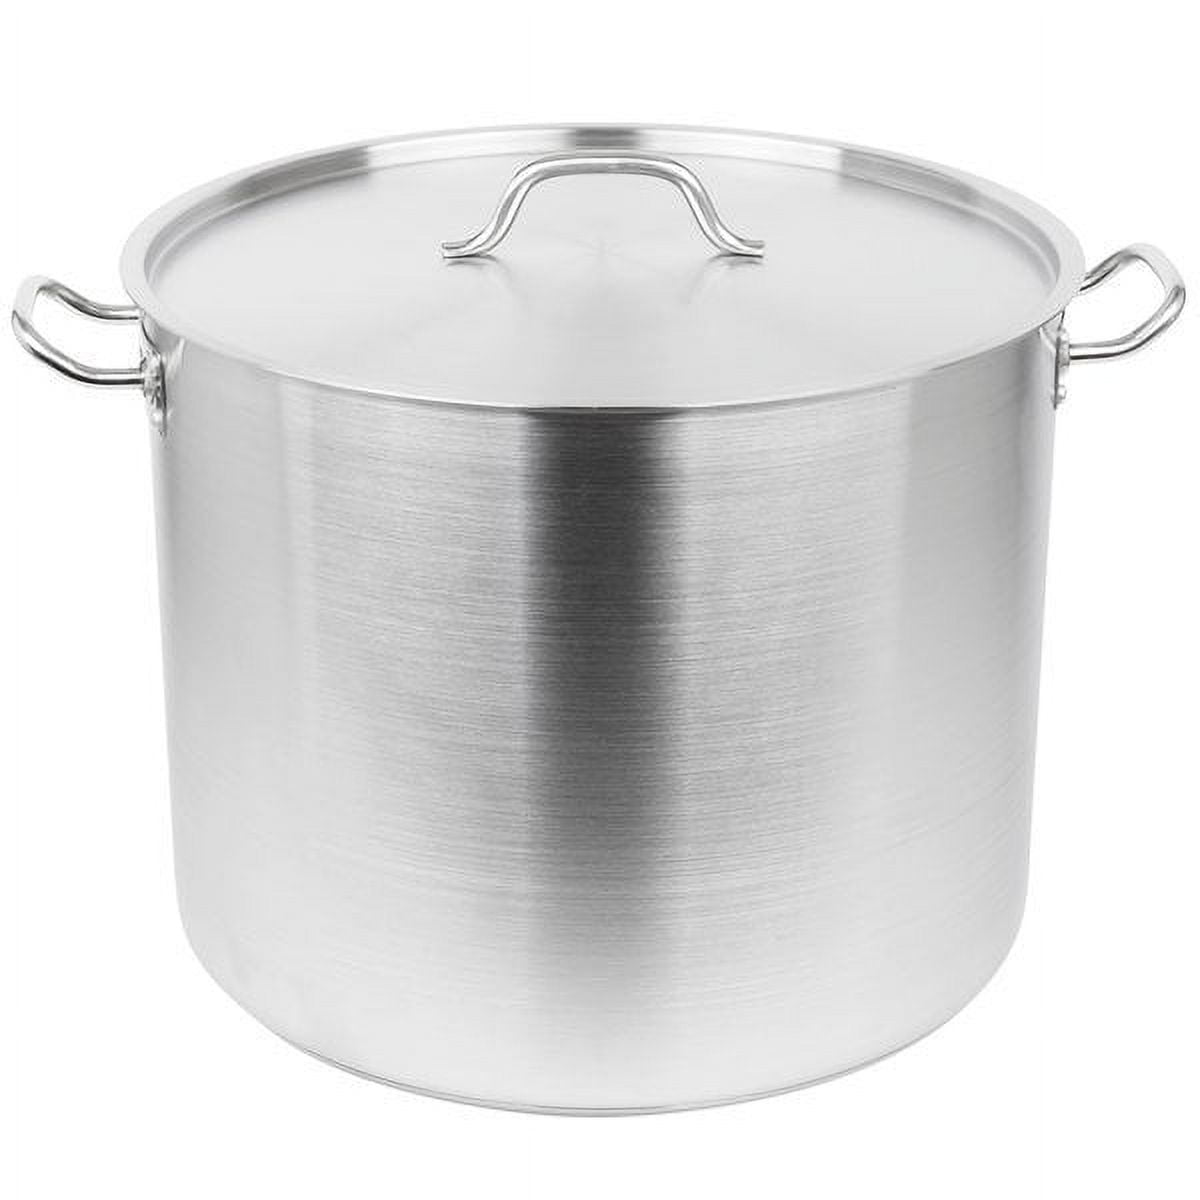 Vigor SS1 Series 80 Qt. Heavy-Duty Stainless Steel Aluminum-Clad Stock Pot  with Cover